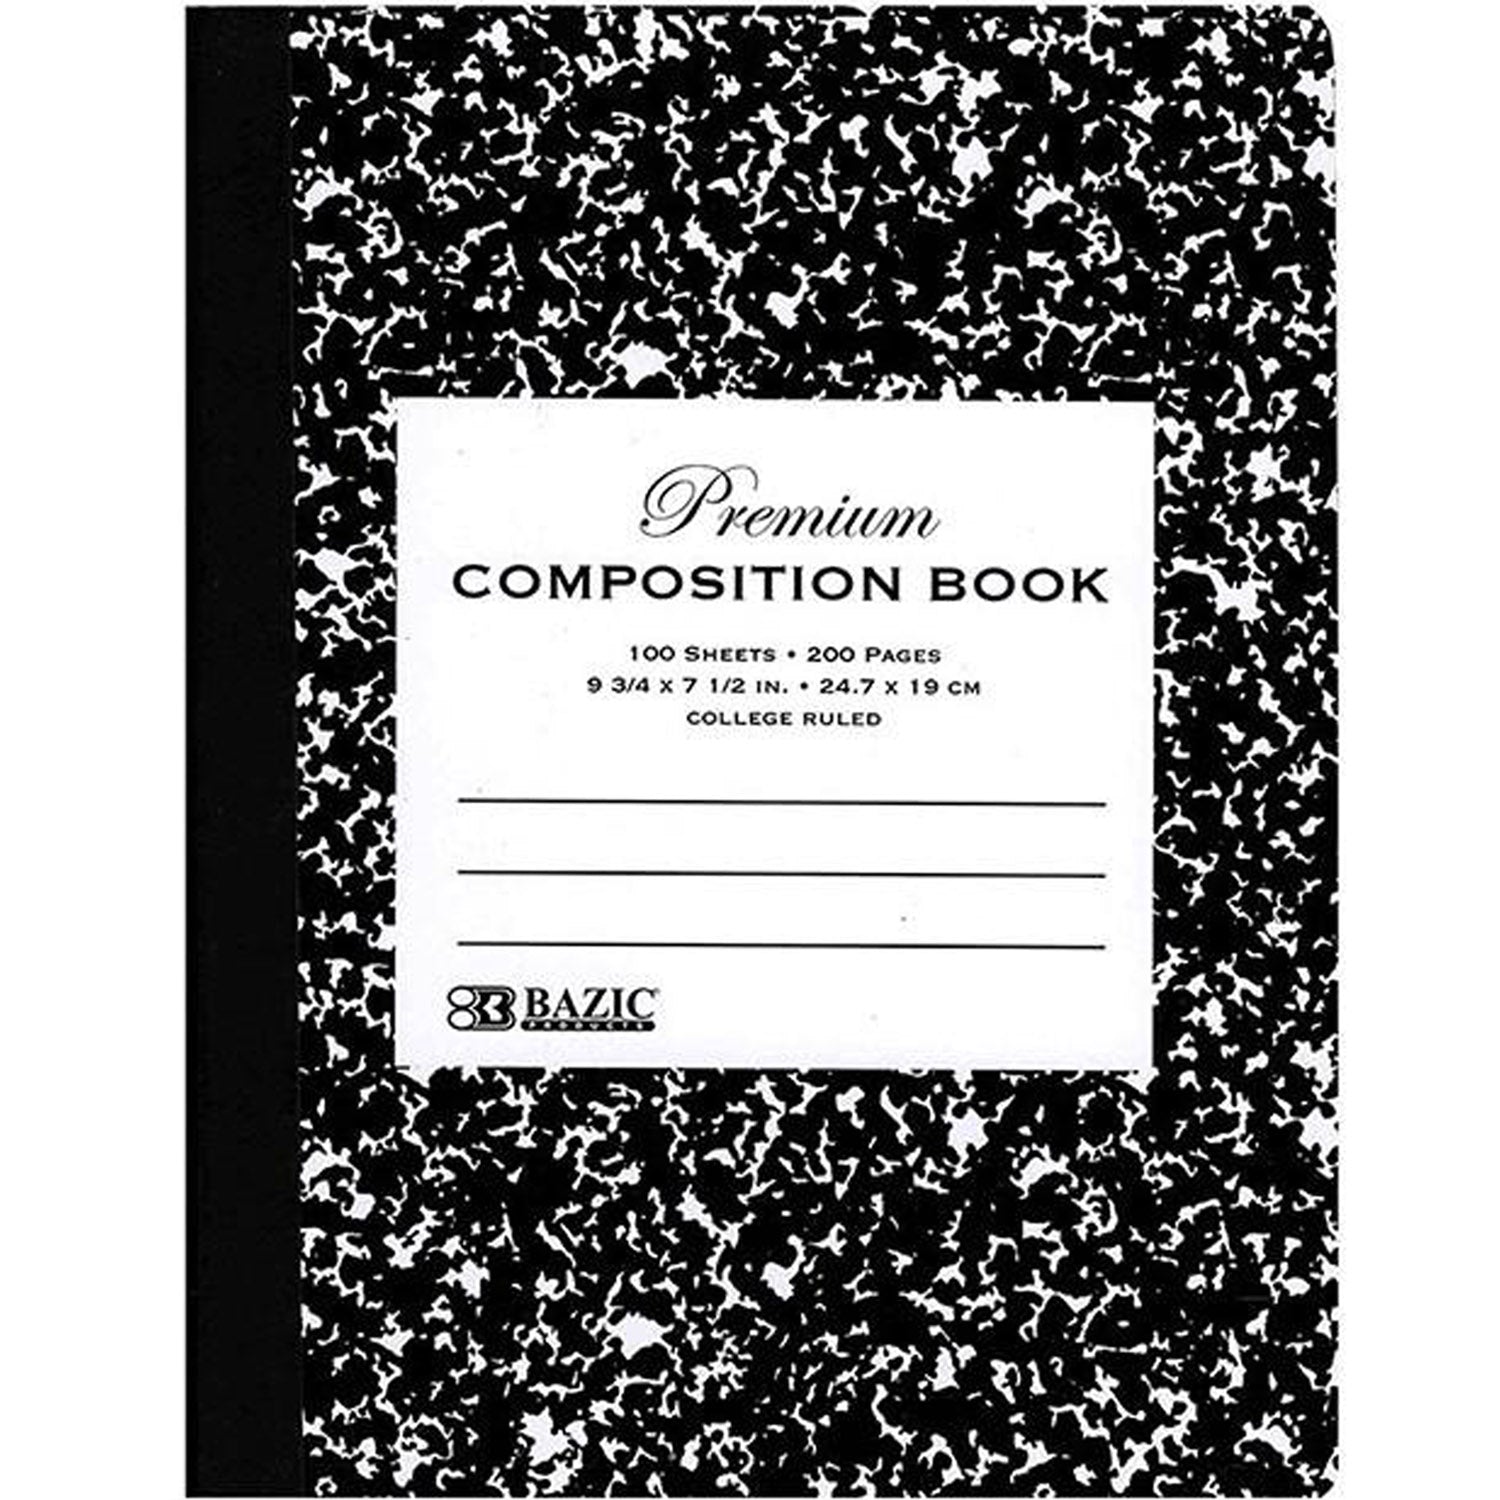 Premium Composition Book Wide Ruled 100 Ct | Black Marble Hard Cover - g8central.com